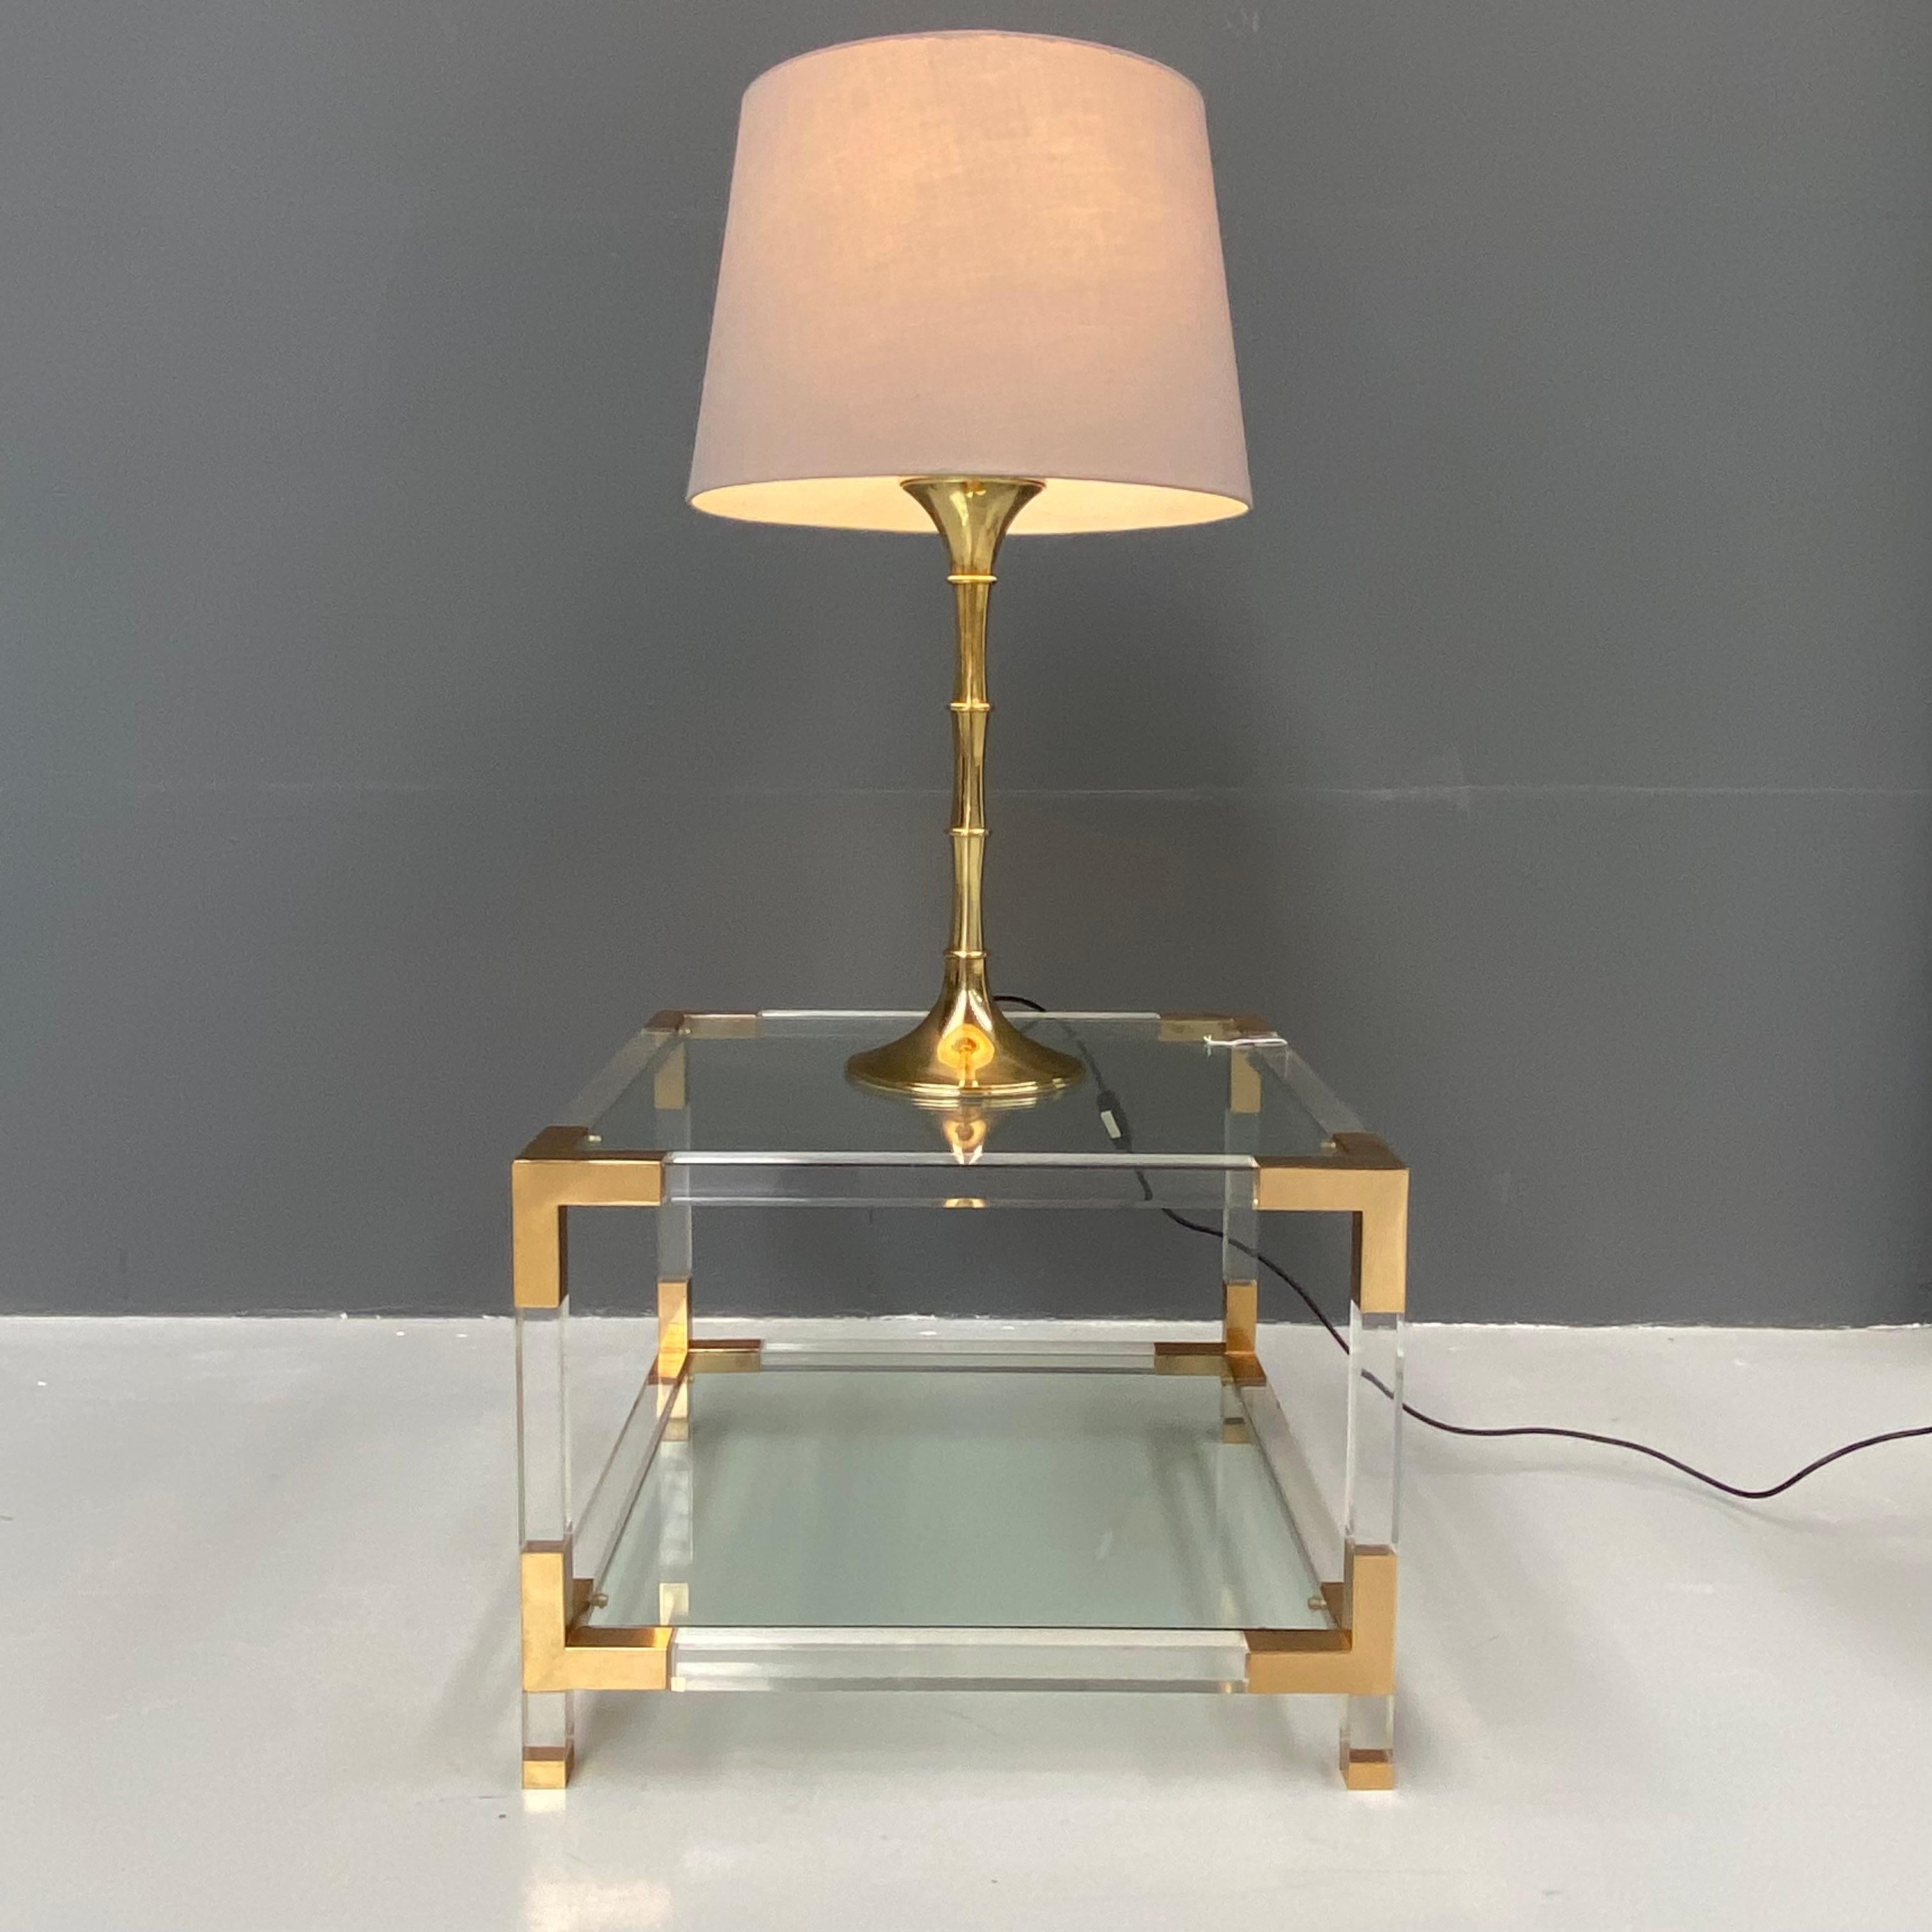 Vintage Bamboo Table Lamp in Brass by Ingo Maurer for M Design, 1960s. For Sale 3